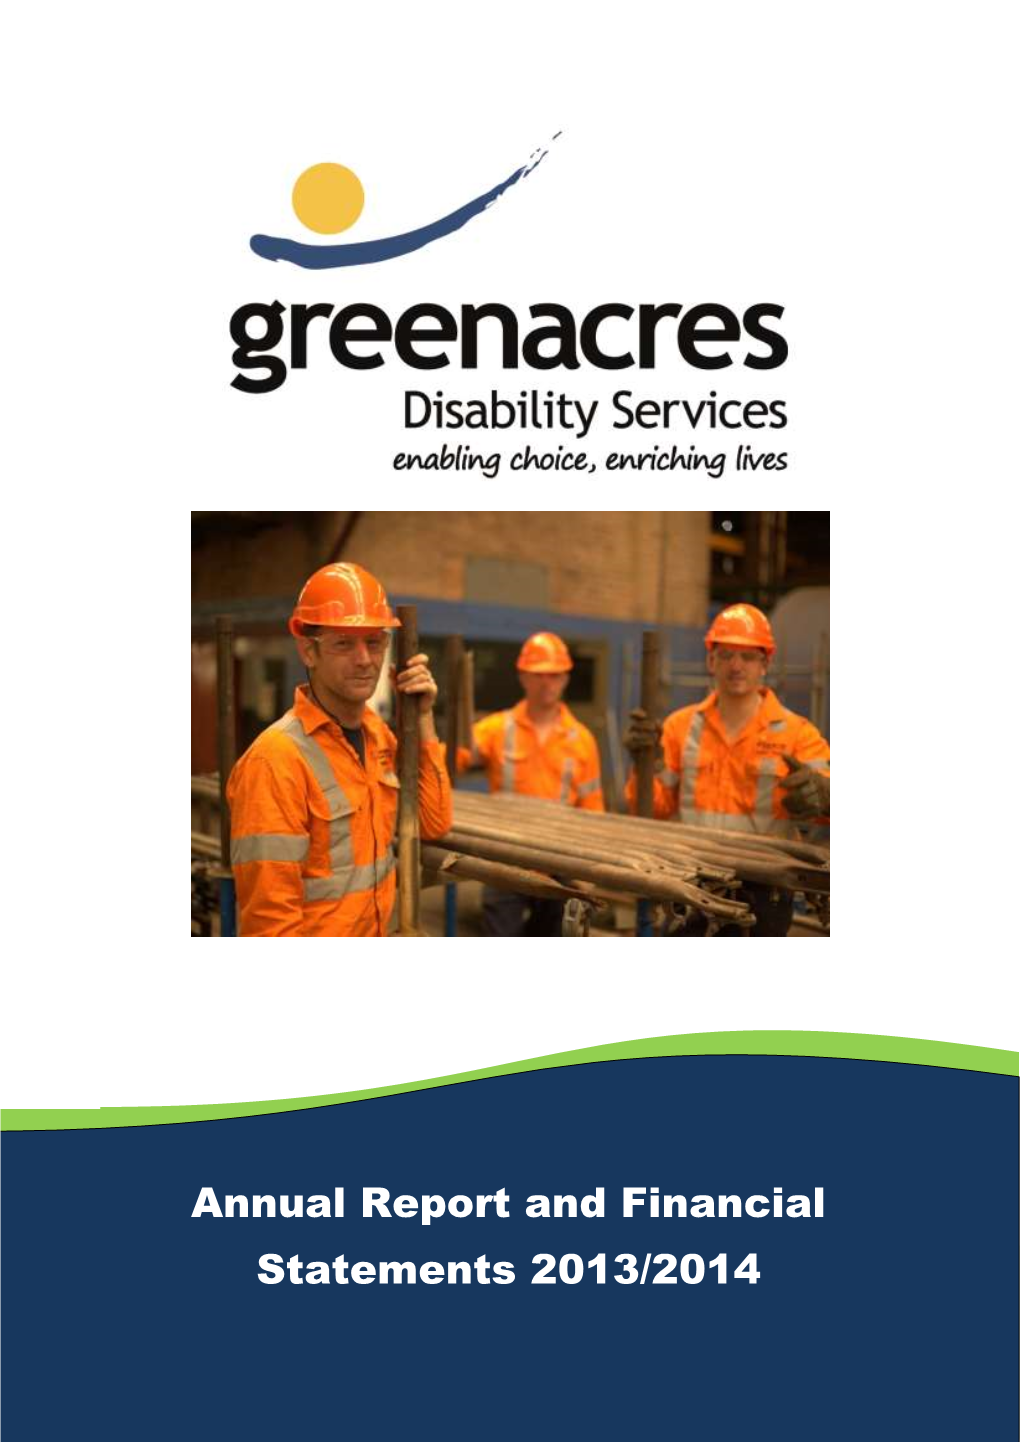 Annual Report and Financial Statements 2013/2014 GREENACRES DISABILITY SERVICES ANNUAL REPORT 2013/2014